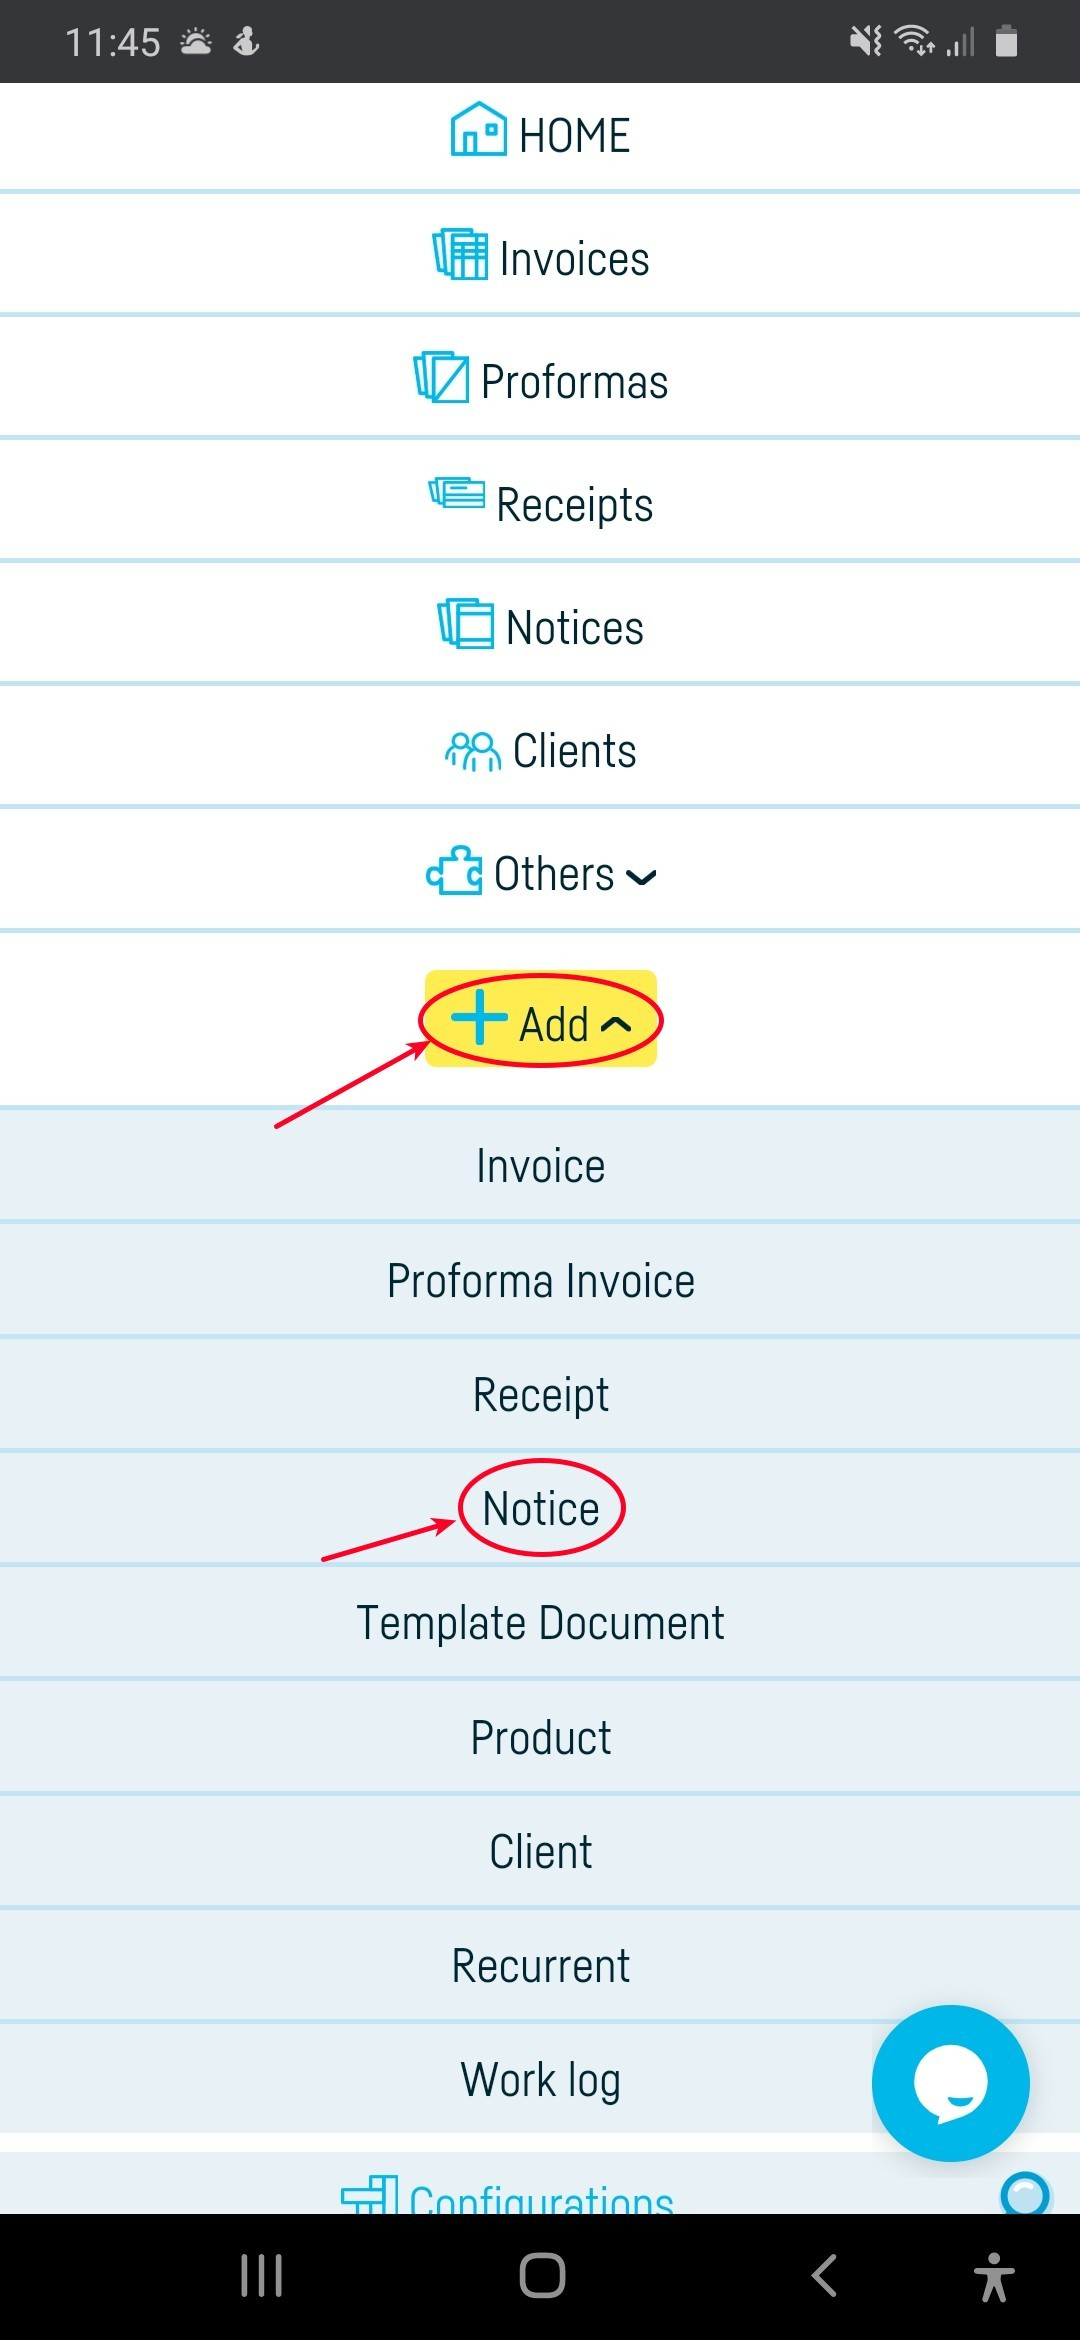 How do I generate an invoice from a notice? - step 1